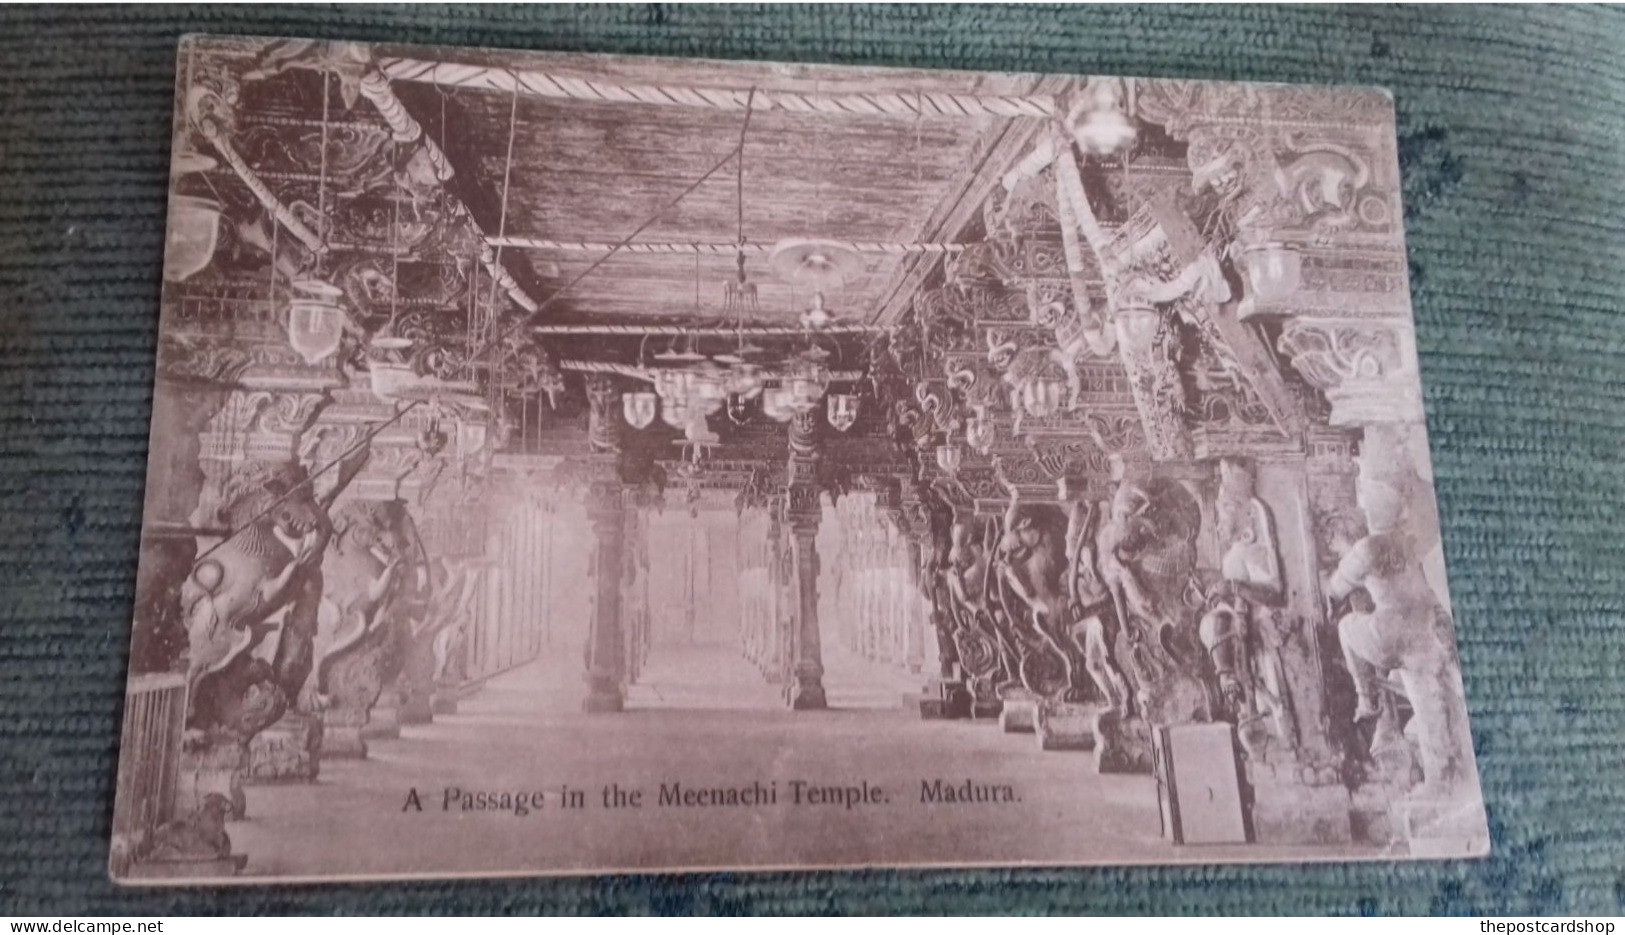 INDIA PAKISTAN - MADURAI Madura - A Passage In The Meenachi Temple - Published By. Wiele & Klein - India